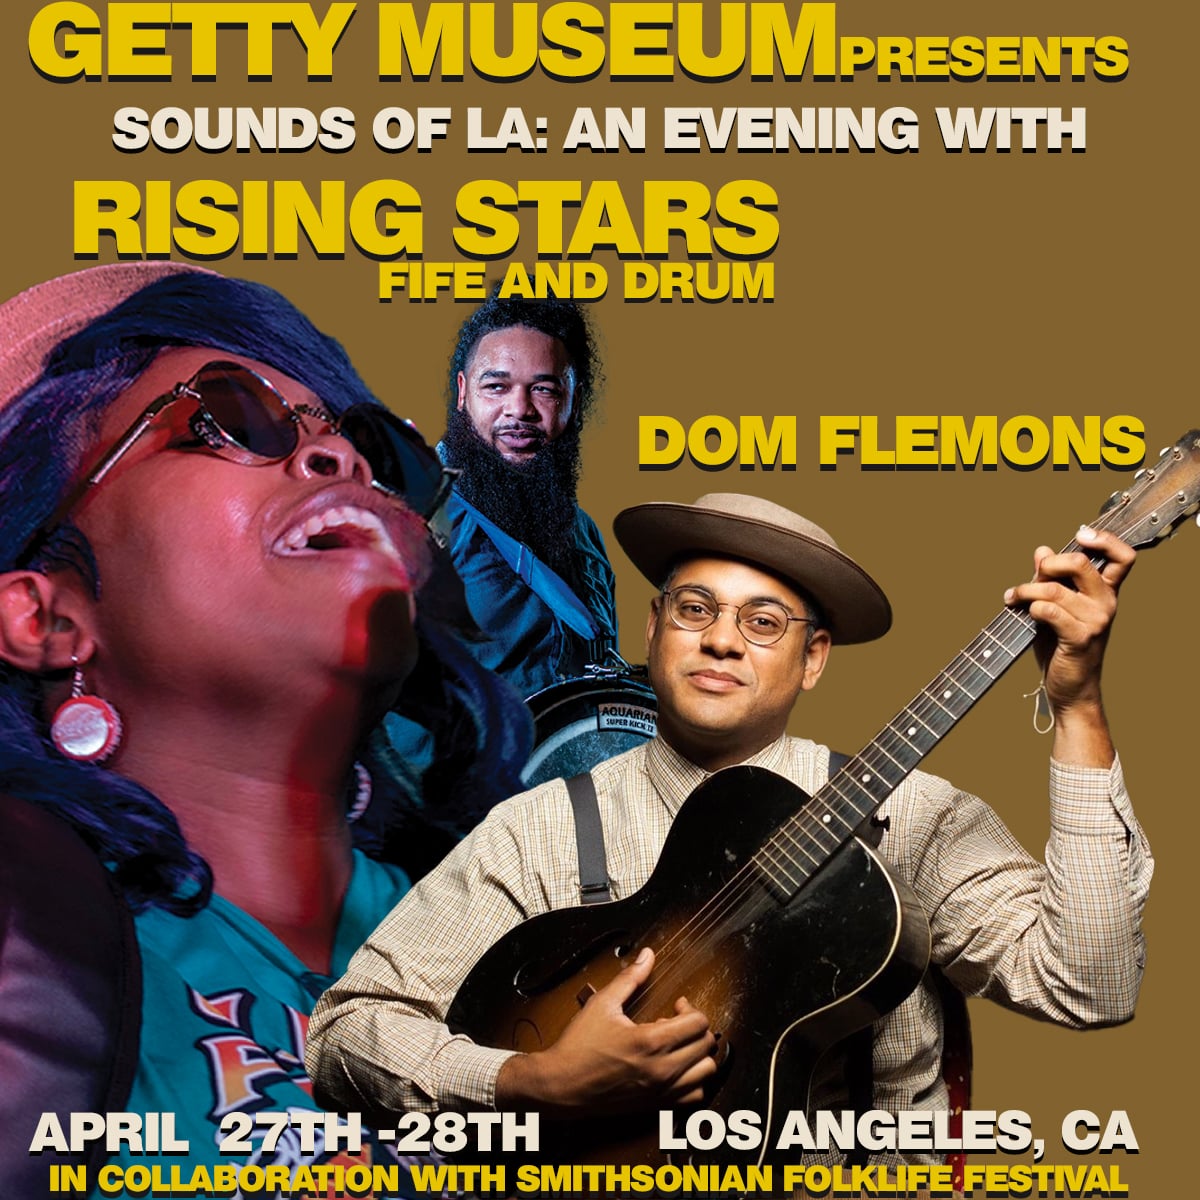 Get ready for an exciting evening with the Rising Stars and Dom Flemons April 27th & 28th at the Getty Museum in Los Angeles, CA. You do not want to miss this special show, click the link below for ticket information🪈🥁🪘💫. #Risingstars getty.edu/visit/cal/even…